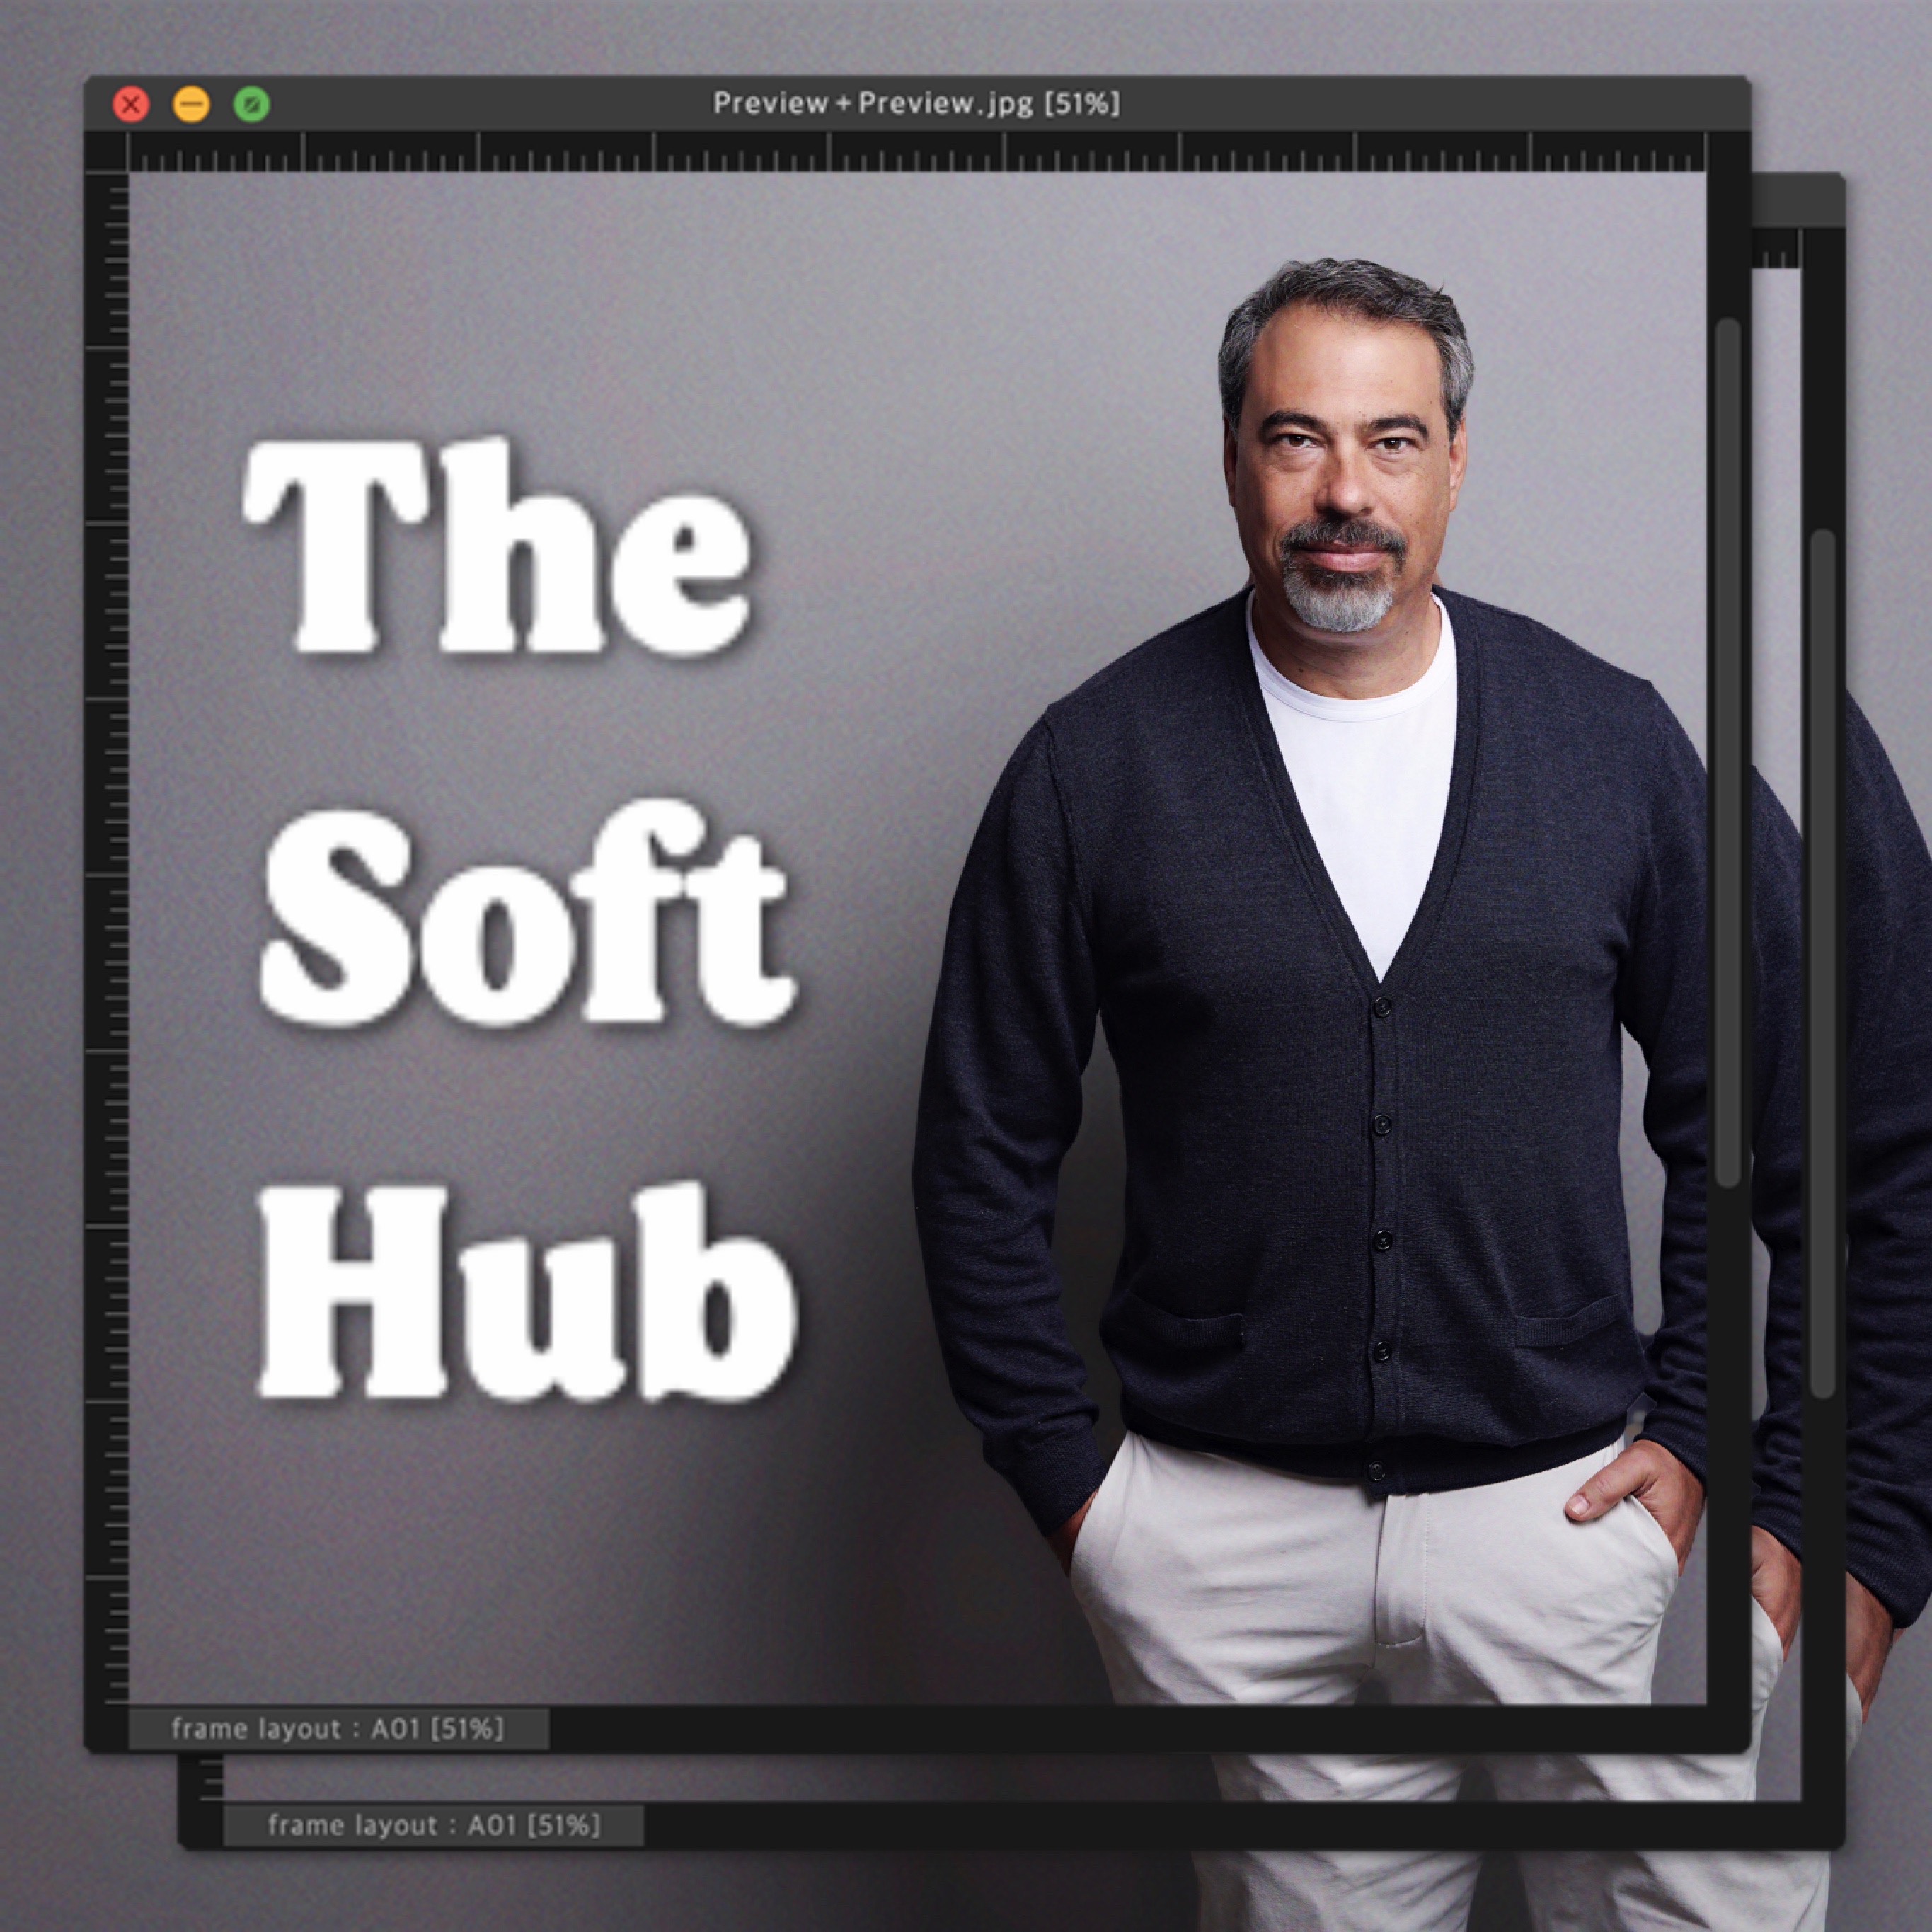 Artwork for The Soft Hub hosted by Yaron Perlman